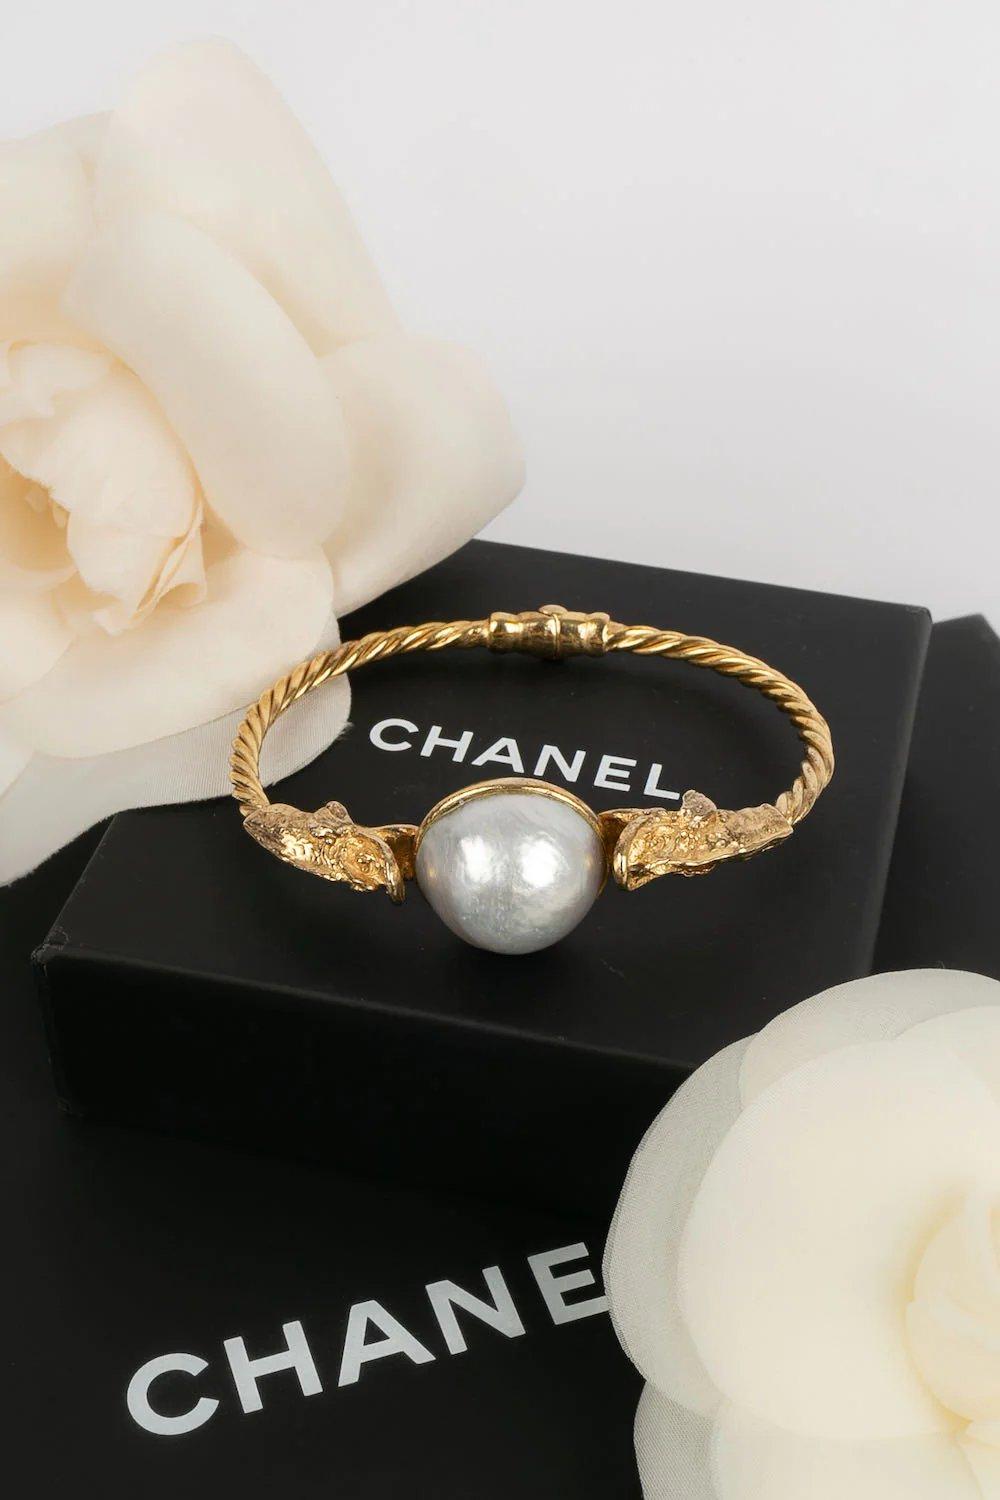 Chanel -Golden metal bracelet with pearly cabochon.

Additional information:
Dimensions: Circumference: 19 cm 
Opening: 9 cm
Condition: Very good condition
Seller Ref number: BRAB55